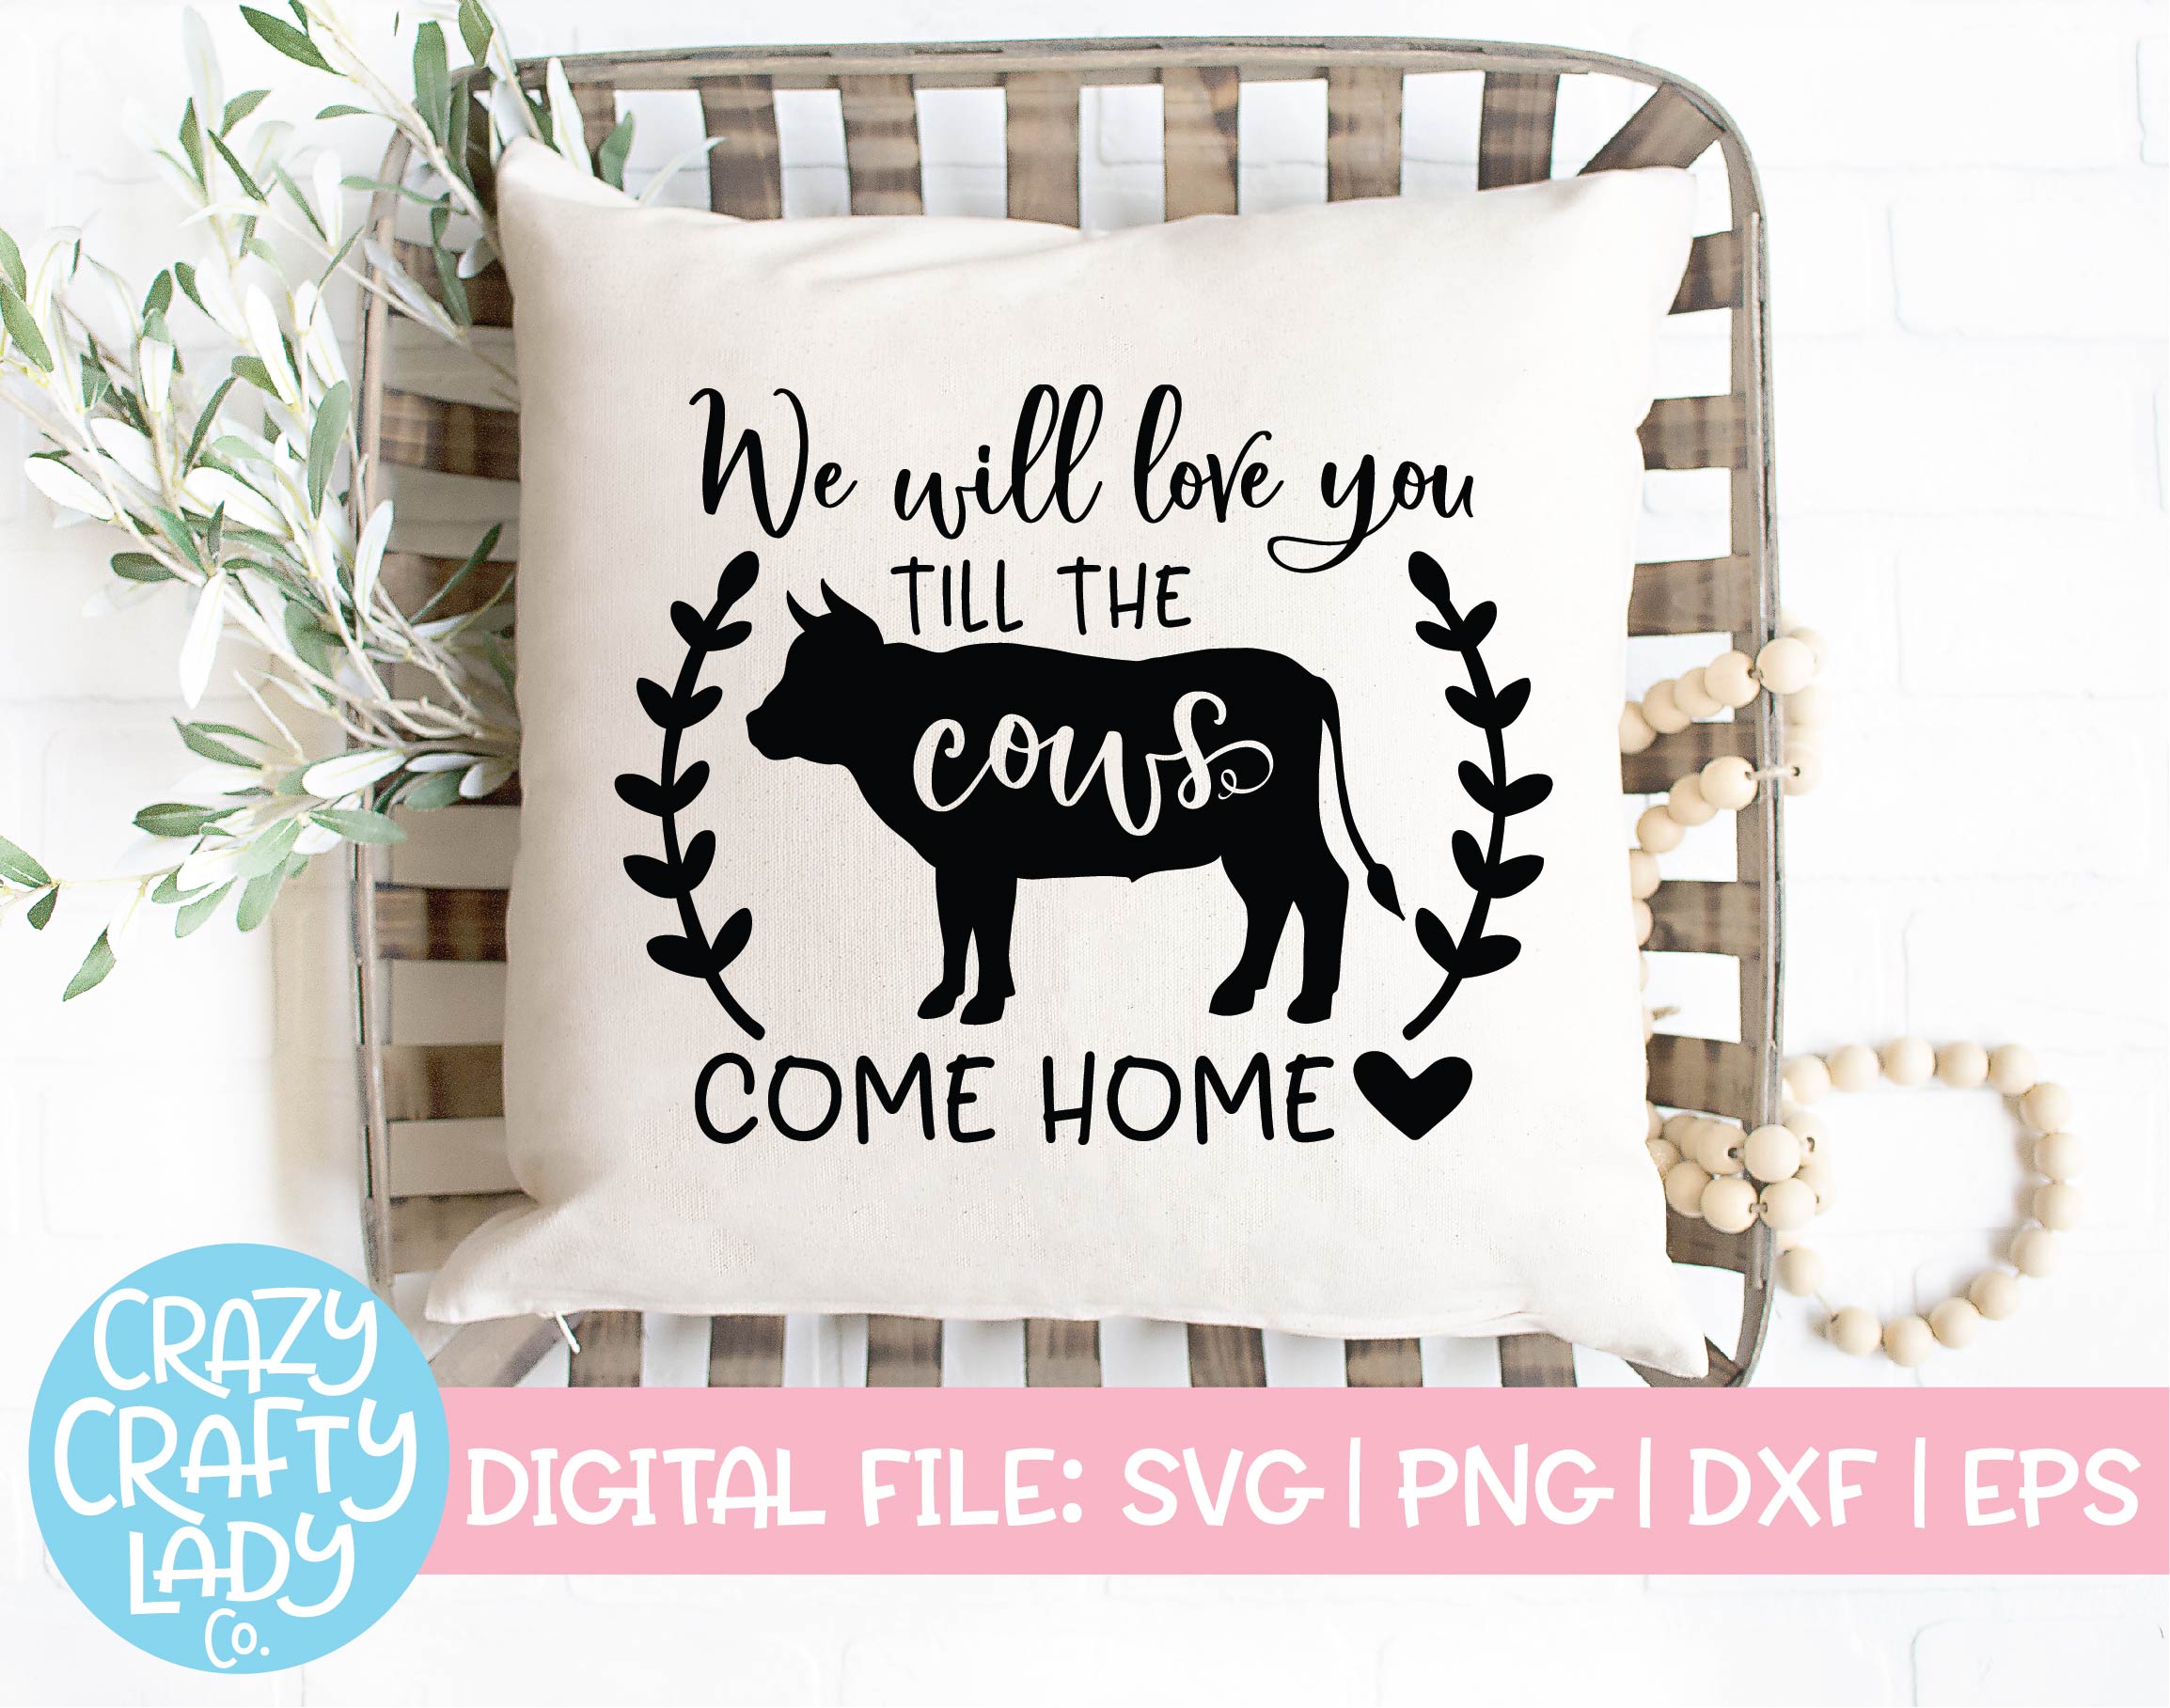 Download We Will Love You Till The Cows Come Home Svg Cut File Crazy Crafty Lady Co